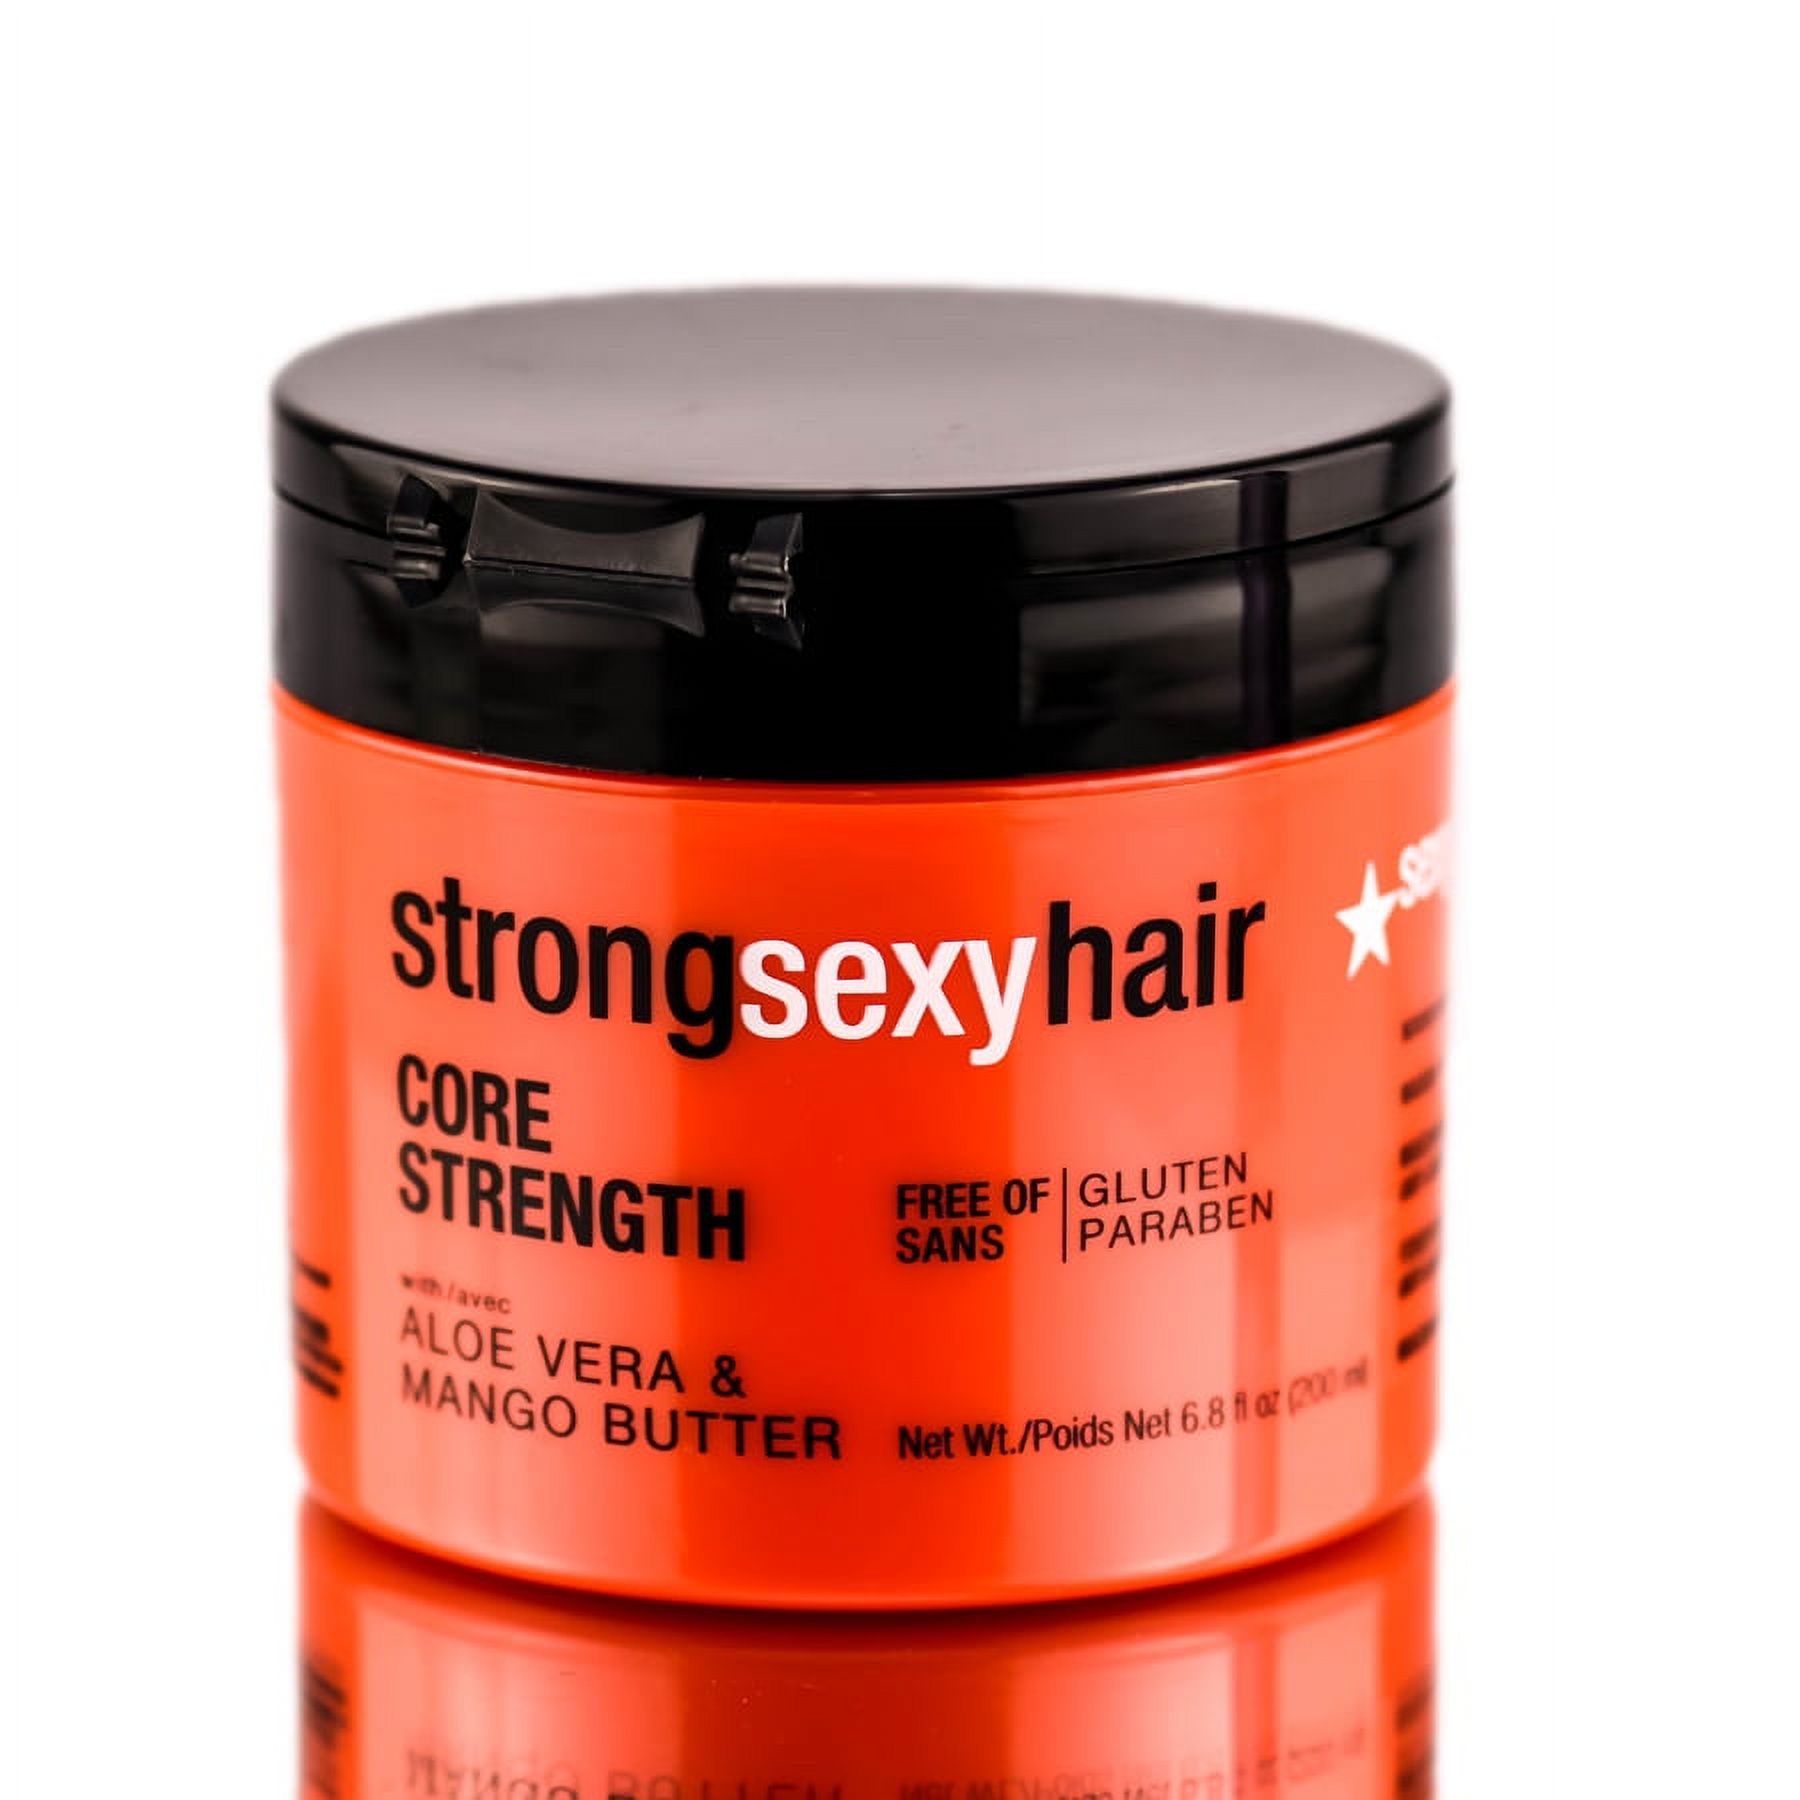 Strong Sexy Hair Core Strength Masque 6.8 oz - image 1 of 2